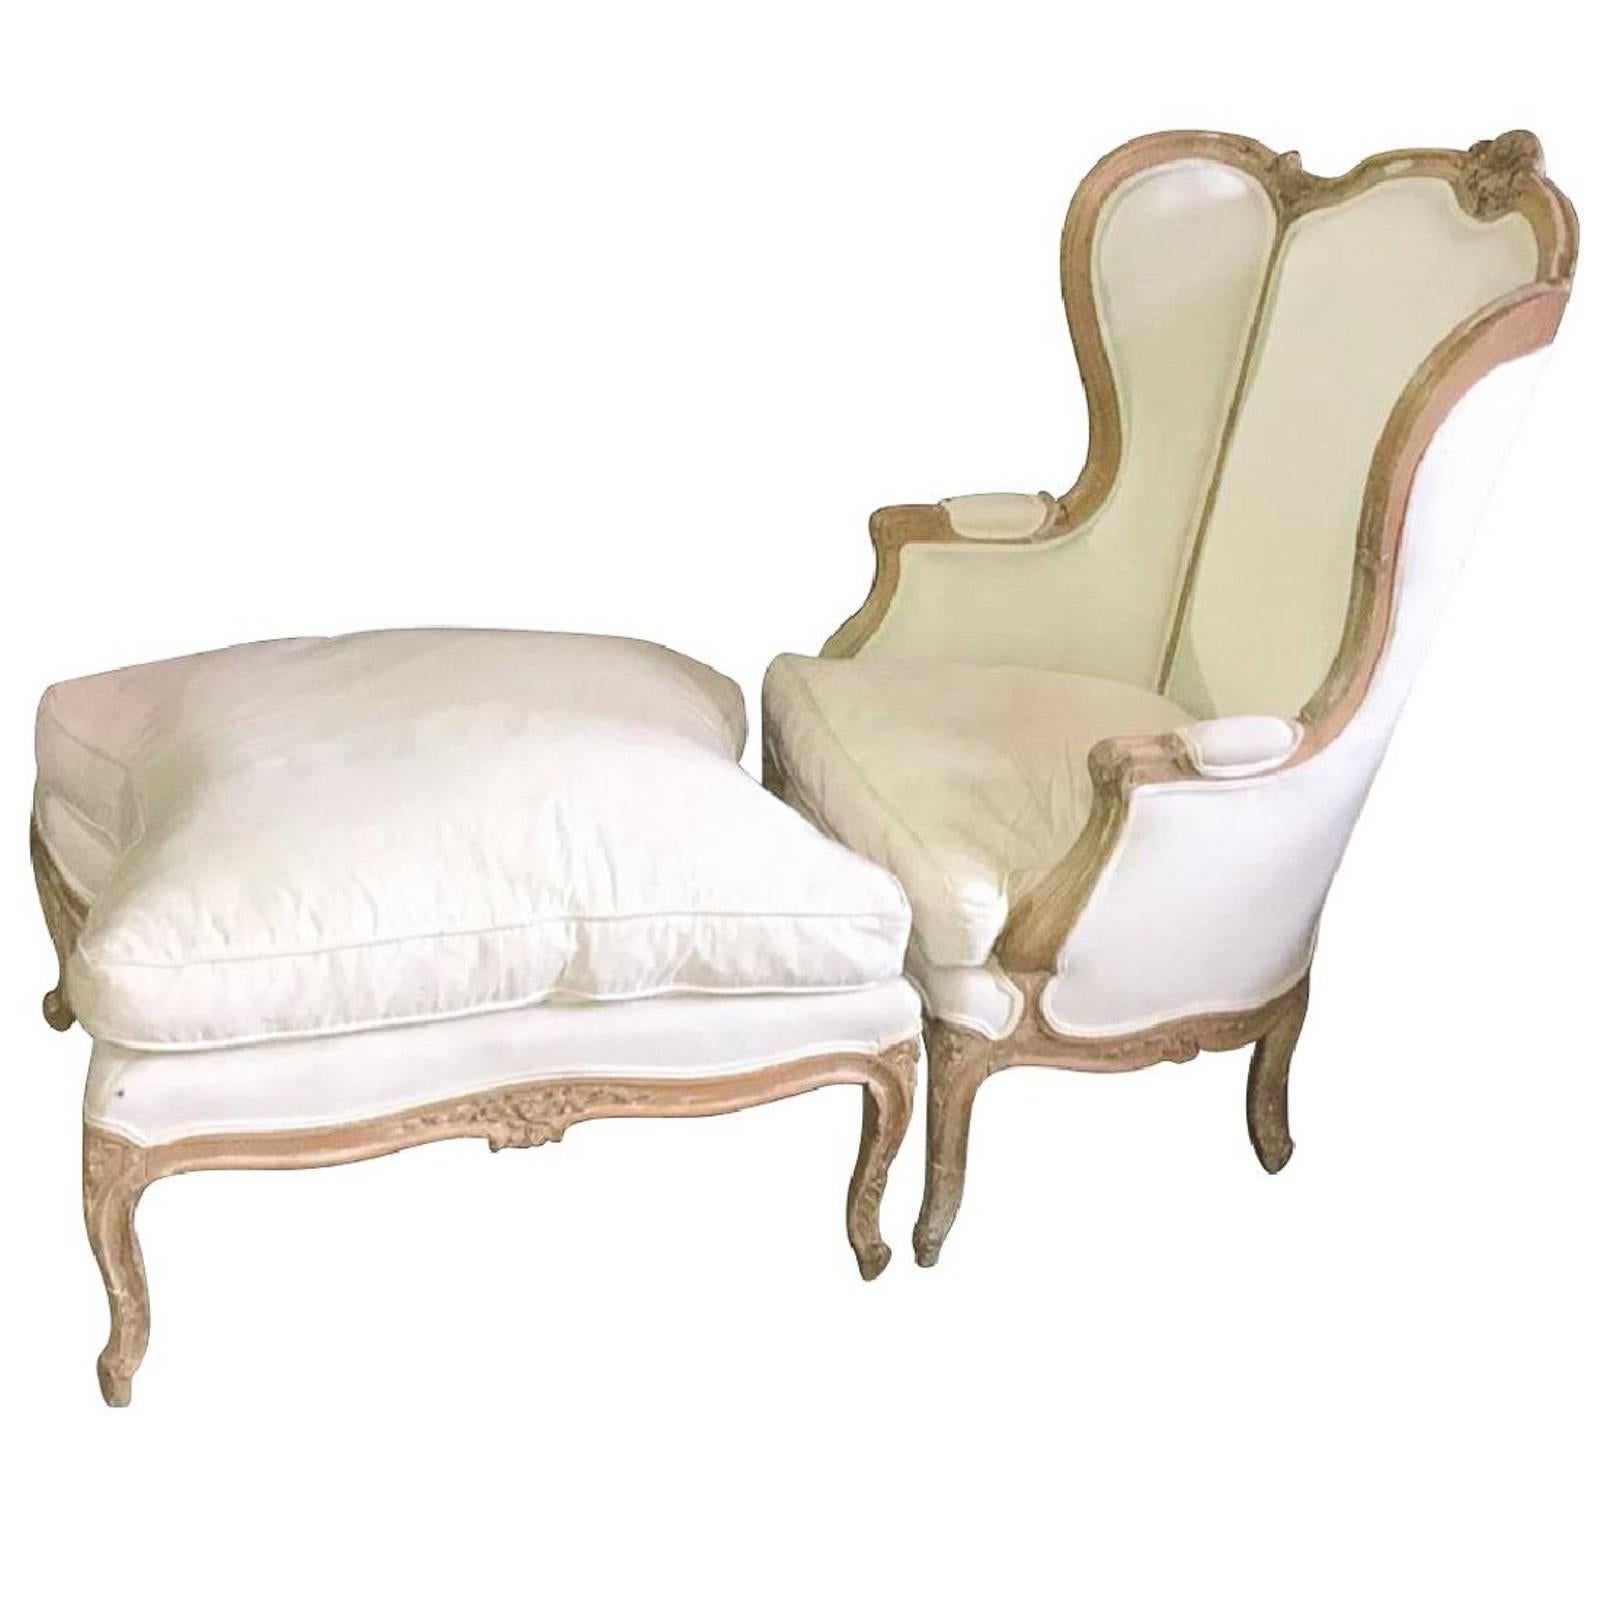 French Louis XVI Style Carved Bleached Walnut Bergere with Ottoman, 19th Century For Sale